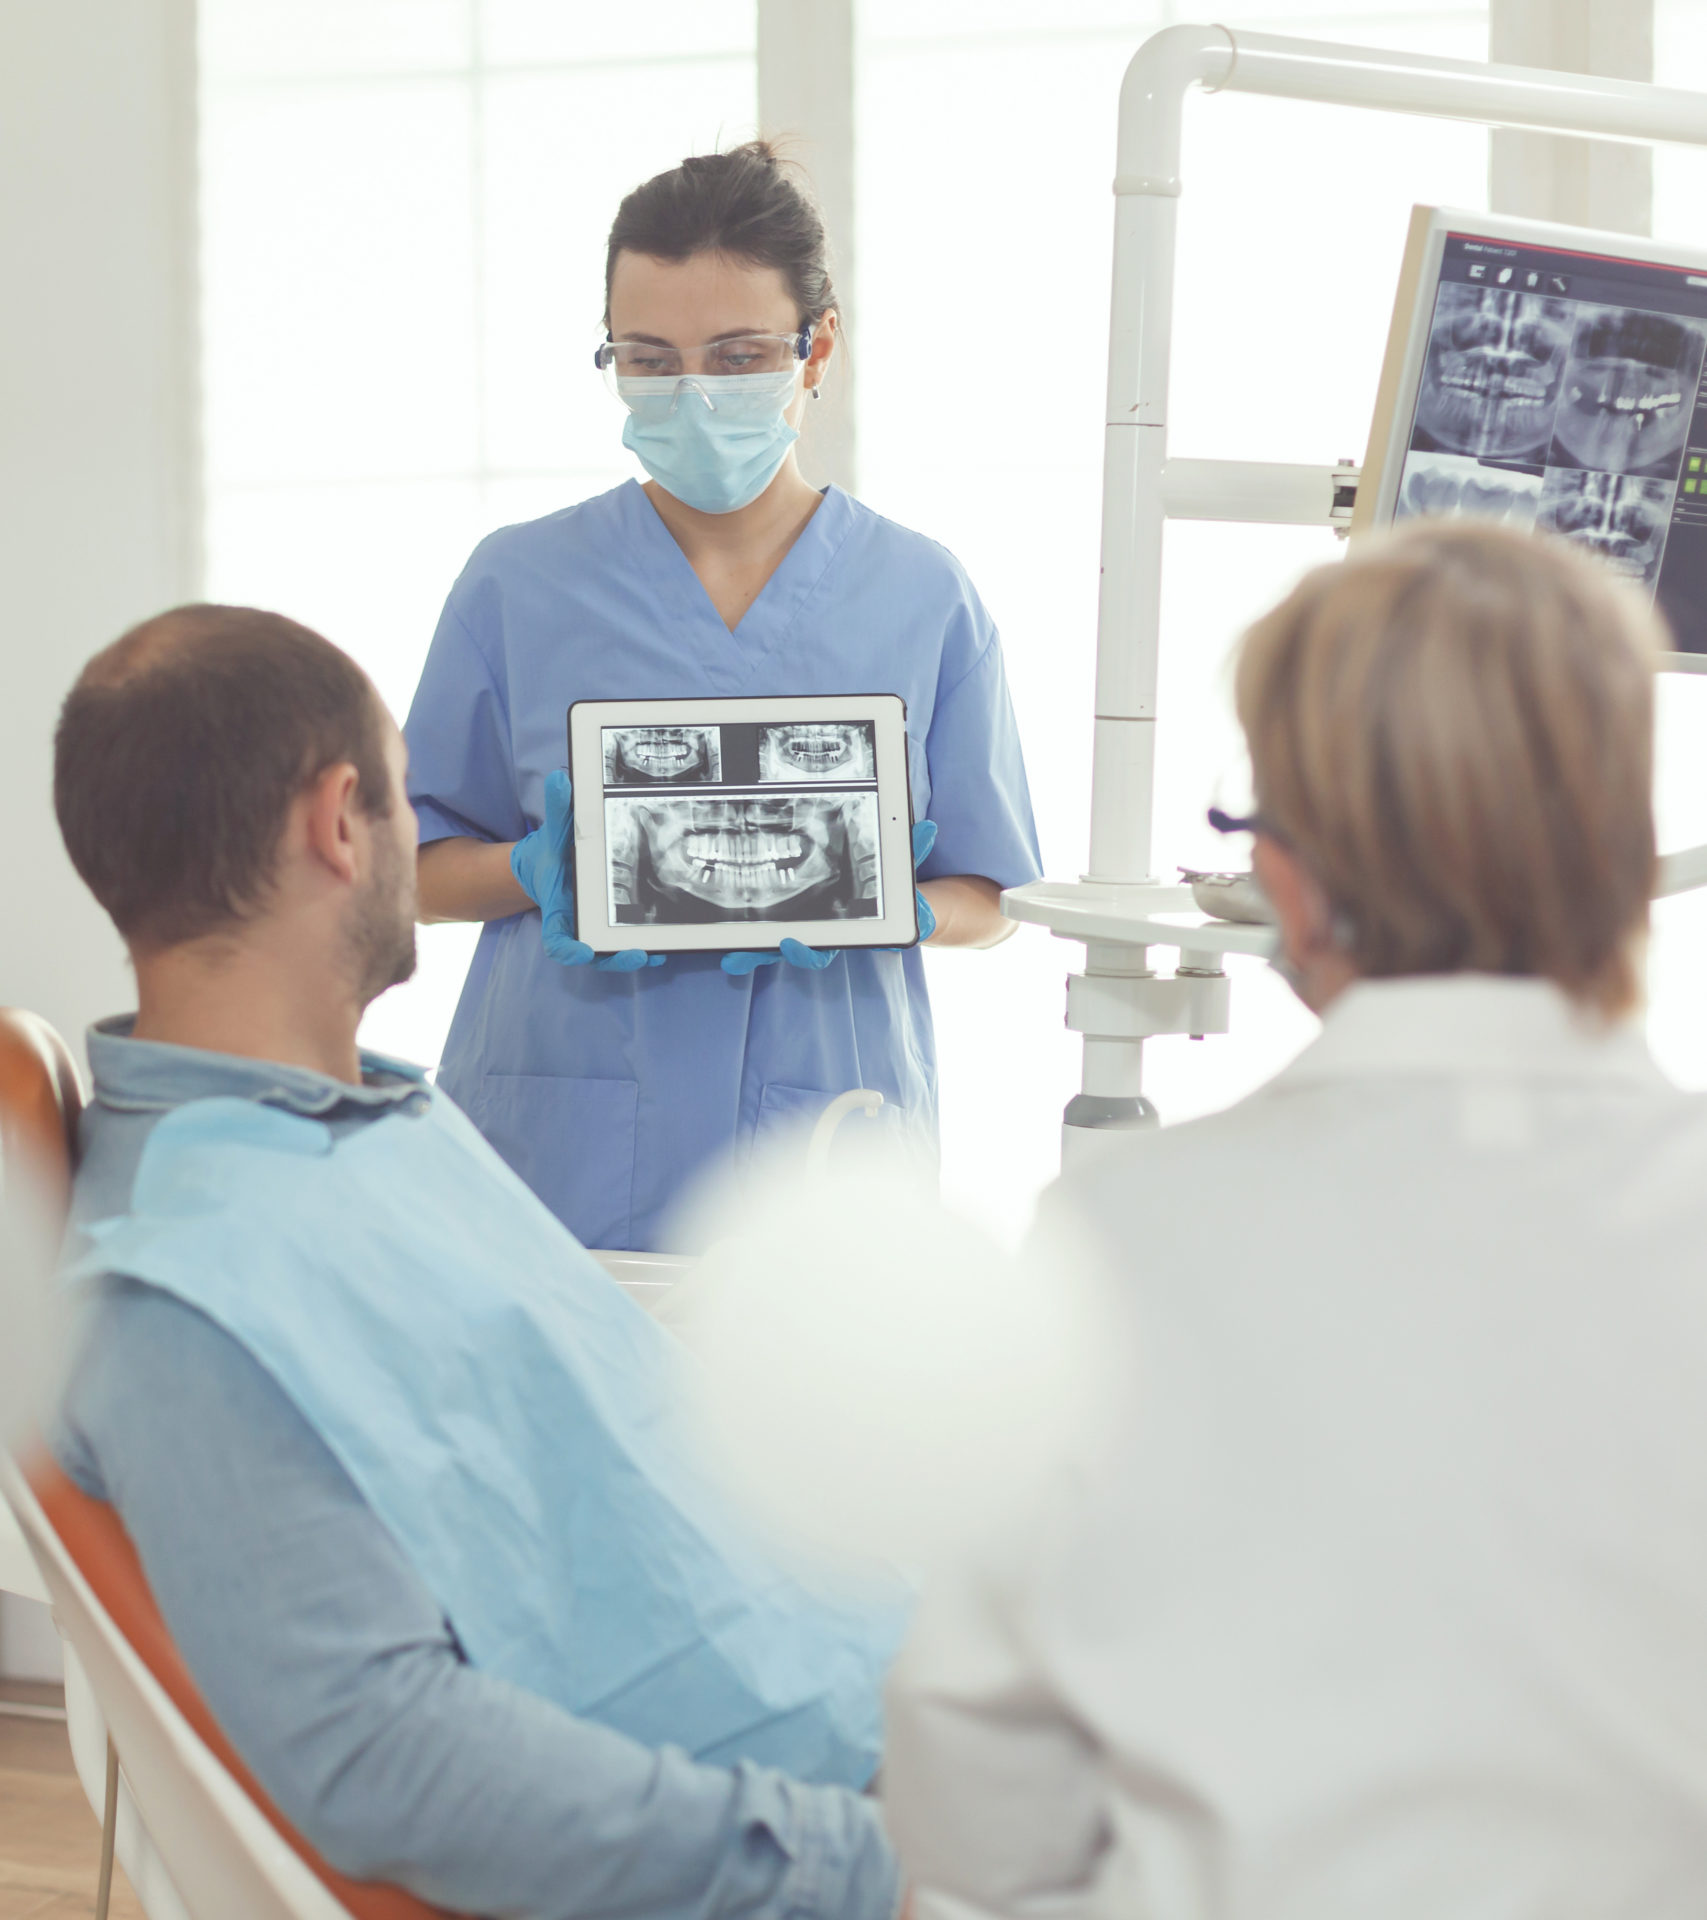 Orthodontist nurse holding digital tablet with tooth radiography on screen